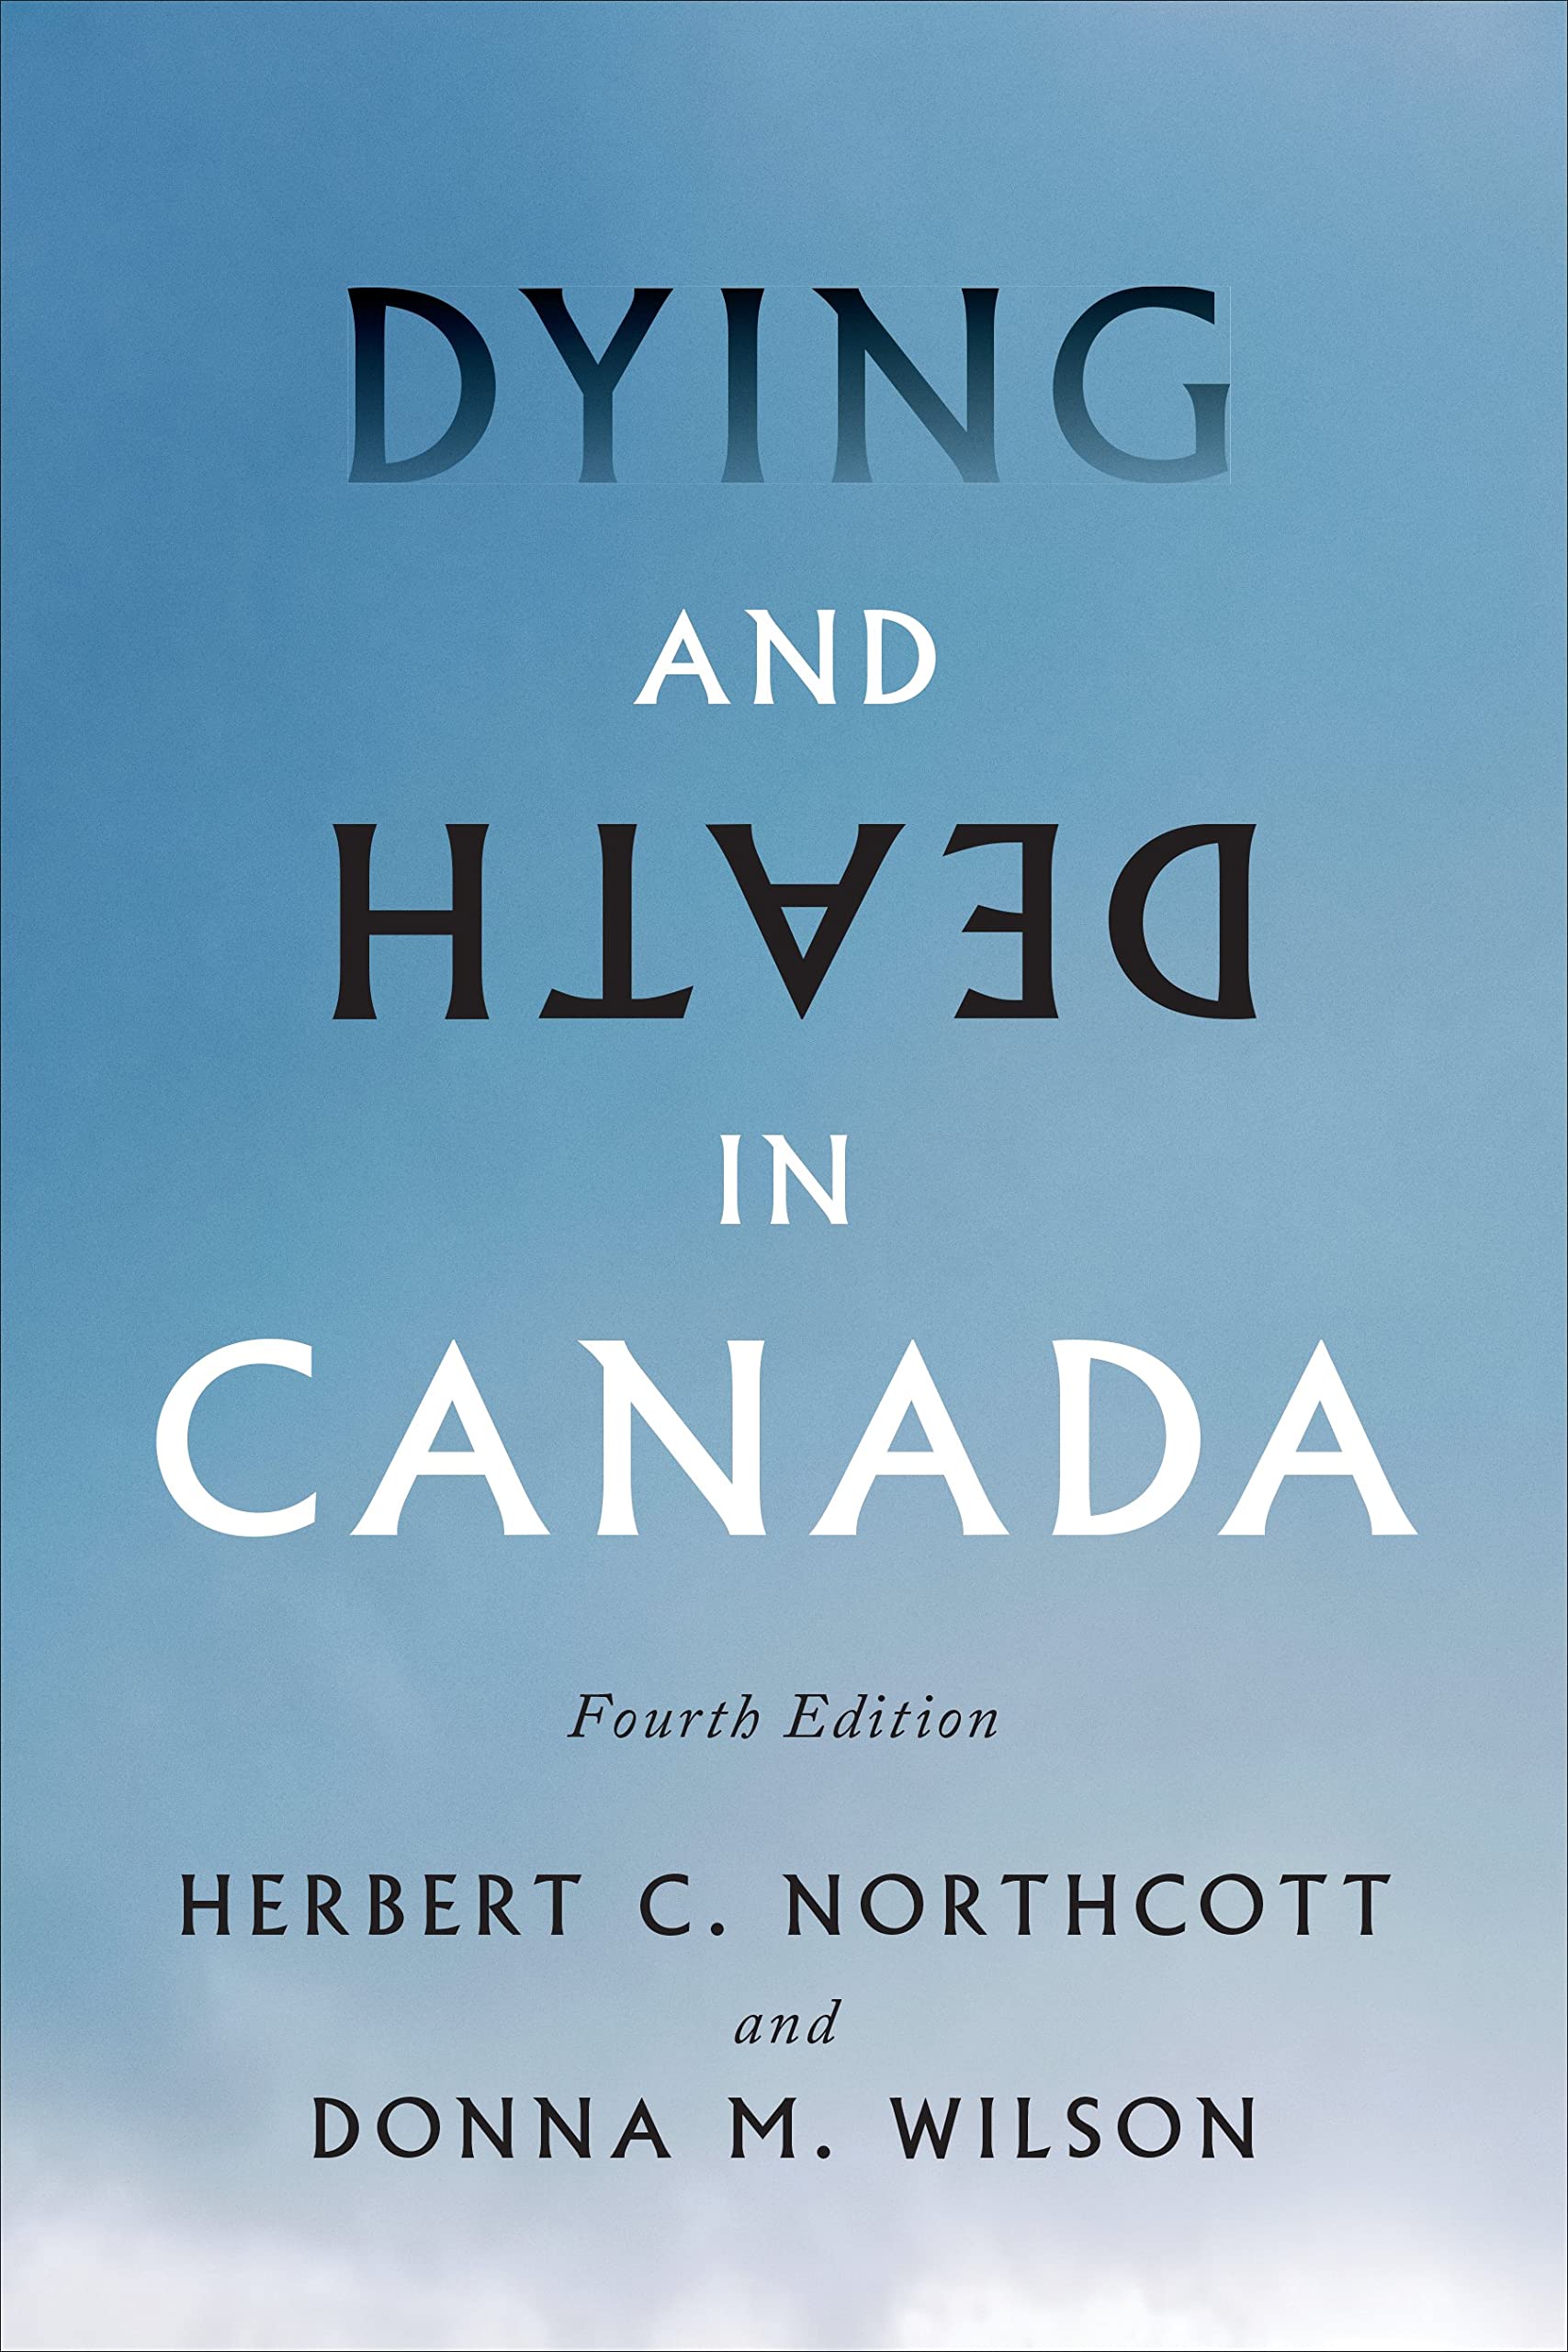 Dying and Death in Canada, Fourth Edition 4th Edition by  Herbert Northcott (Auteur)